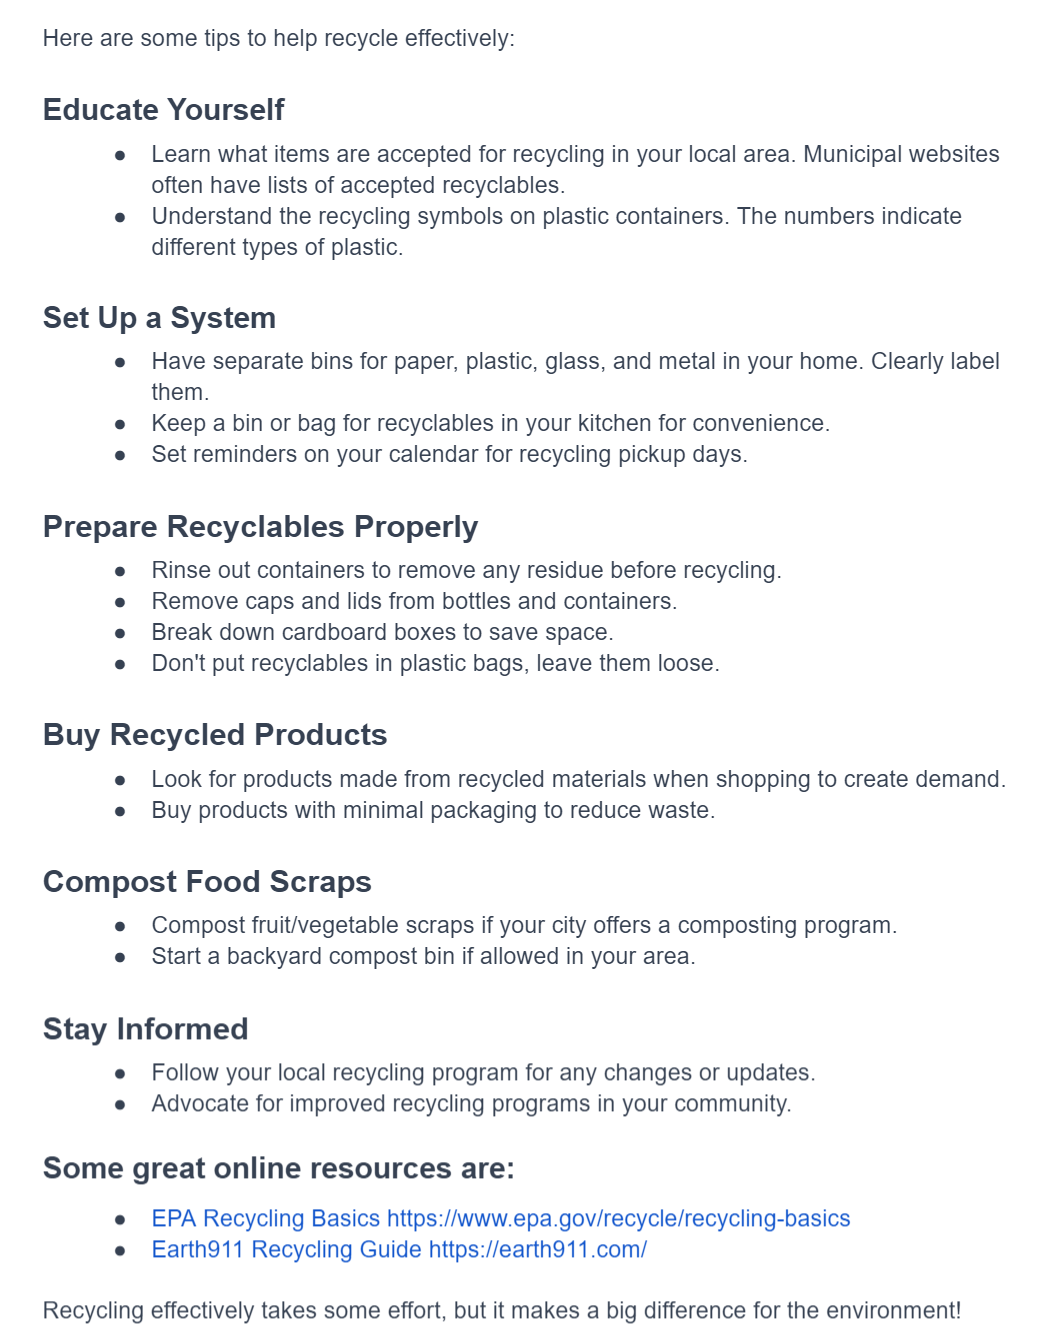 An image of a document about how to recycle effectively which includes the following suggestions: Educate Yourself, Set Up a System, Prepare Recyclables Properal, Buy Recycled Products, Compost Food Scraps, and Stay Informed.